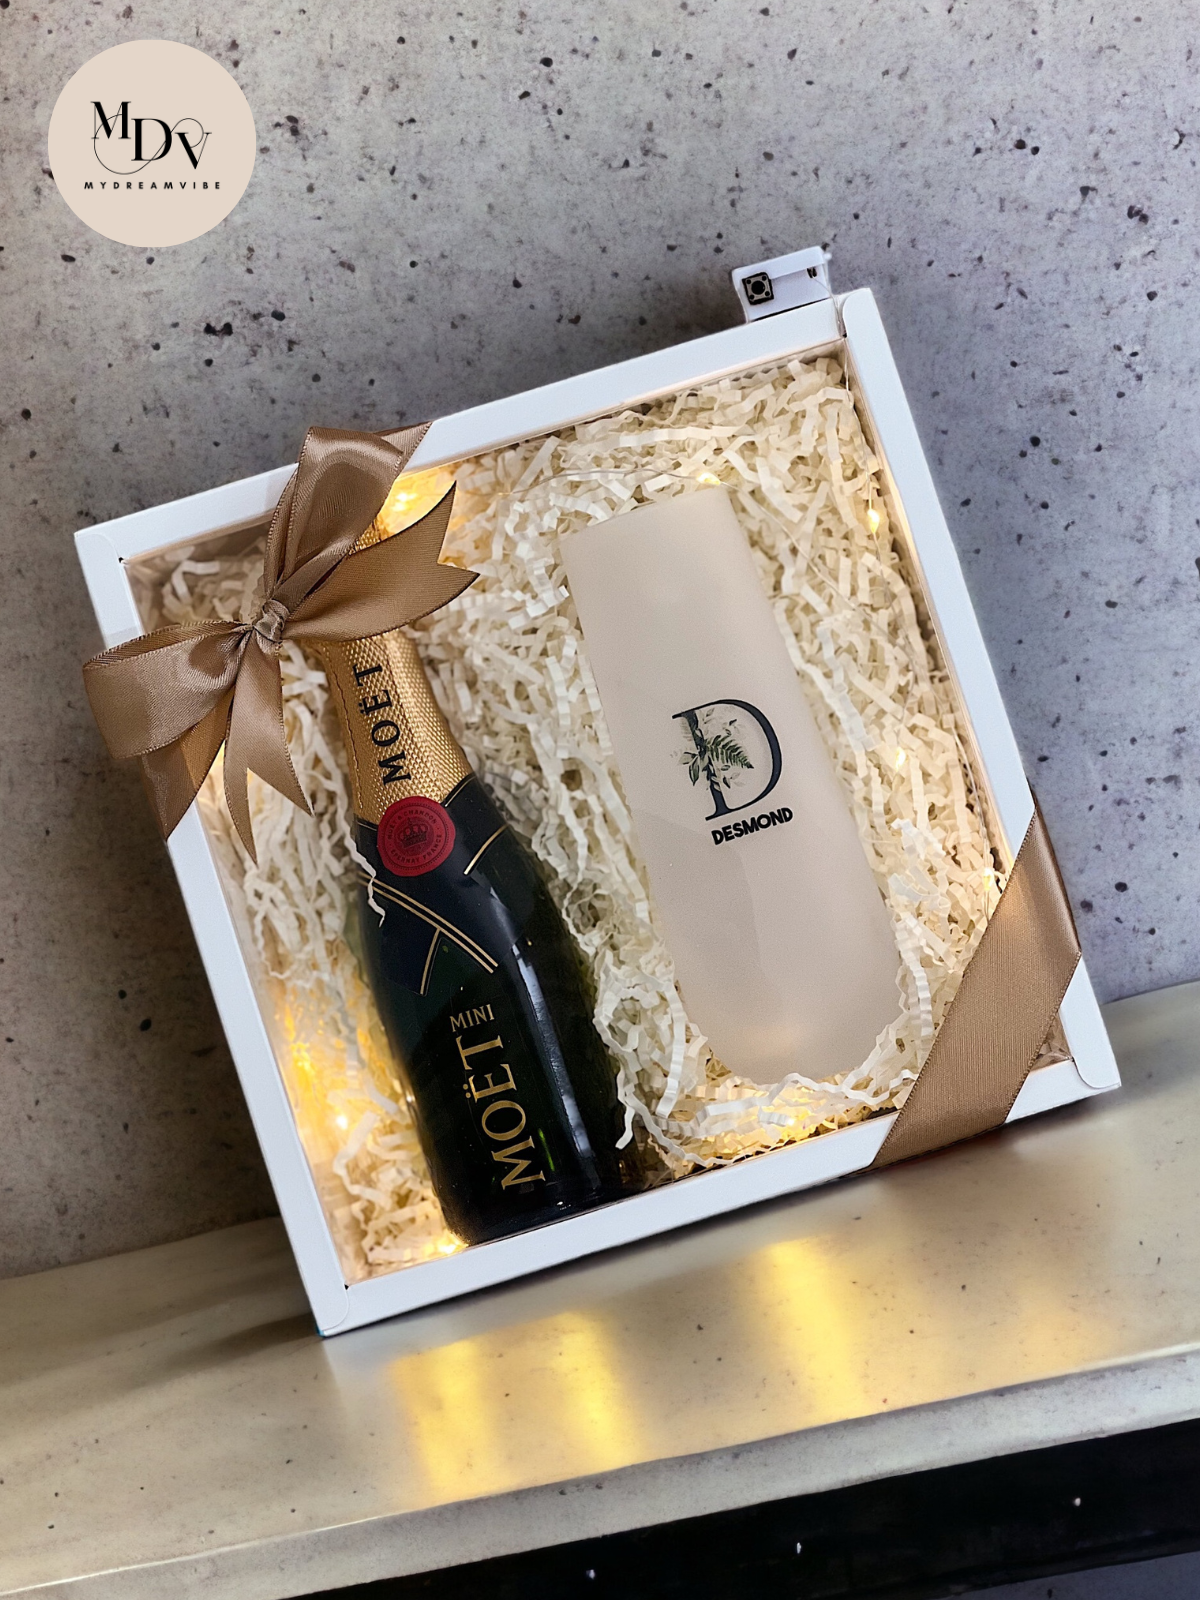 Perfect Champagne Gift - Choice of Moet / Bottega Mini with Frosted Champagne Flute